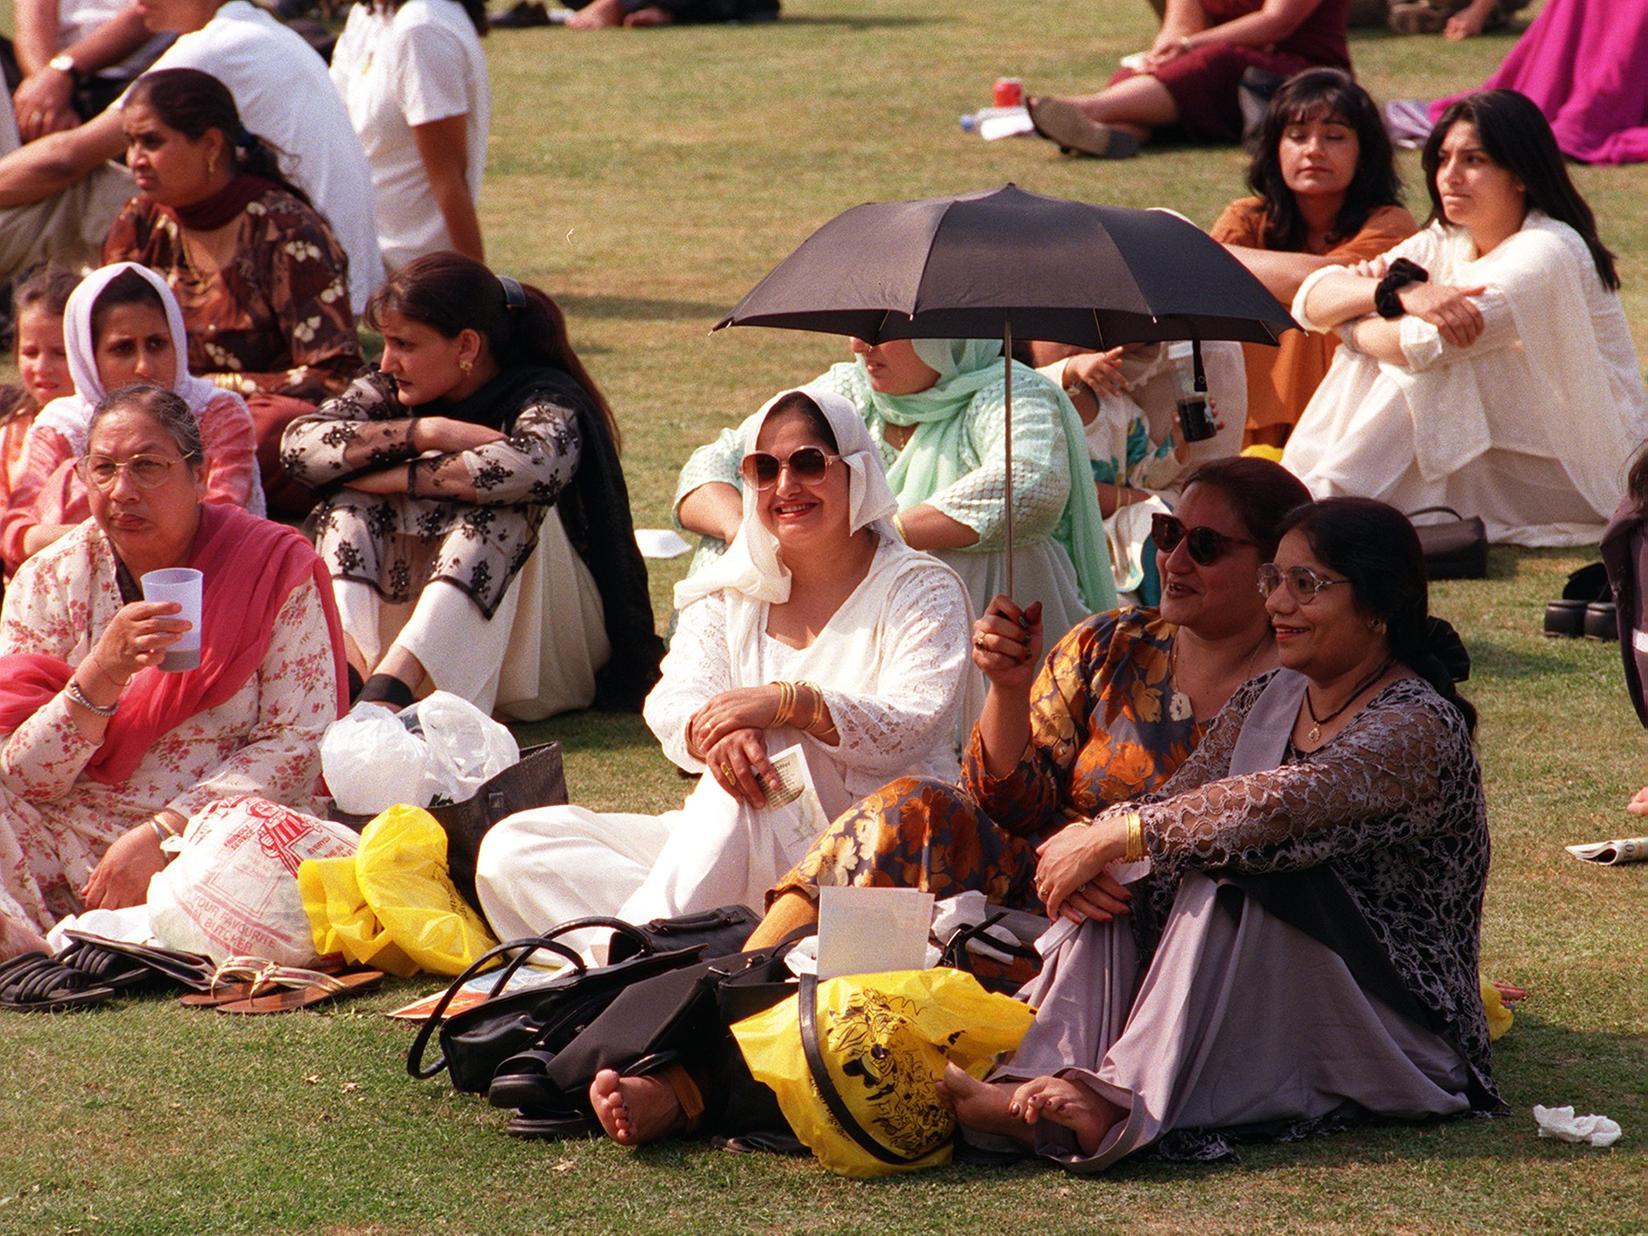 Some of the visitors at Leeds Mela tried to keep cool in the sun by using an umbrella at Roundhay Park.